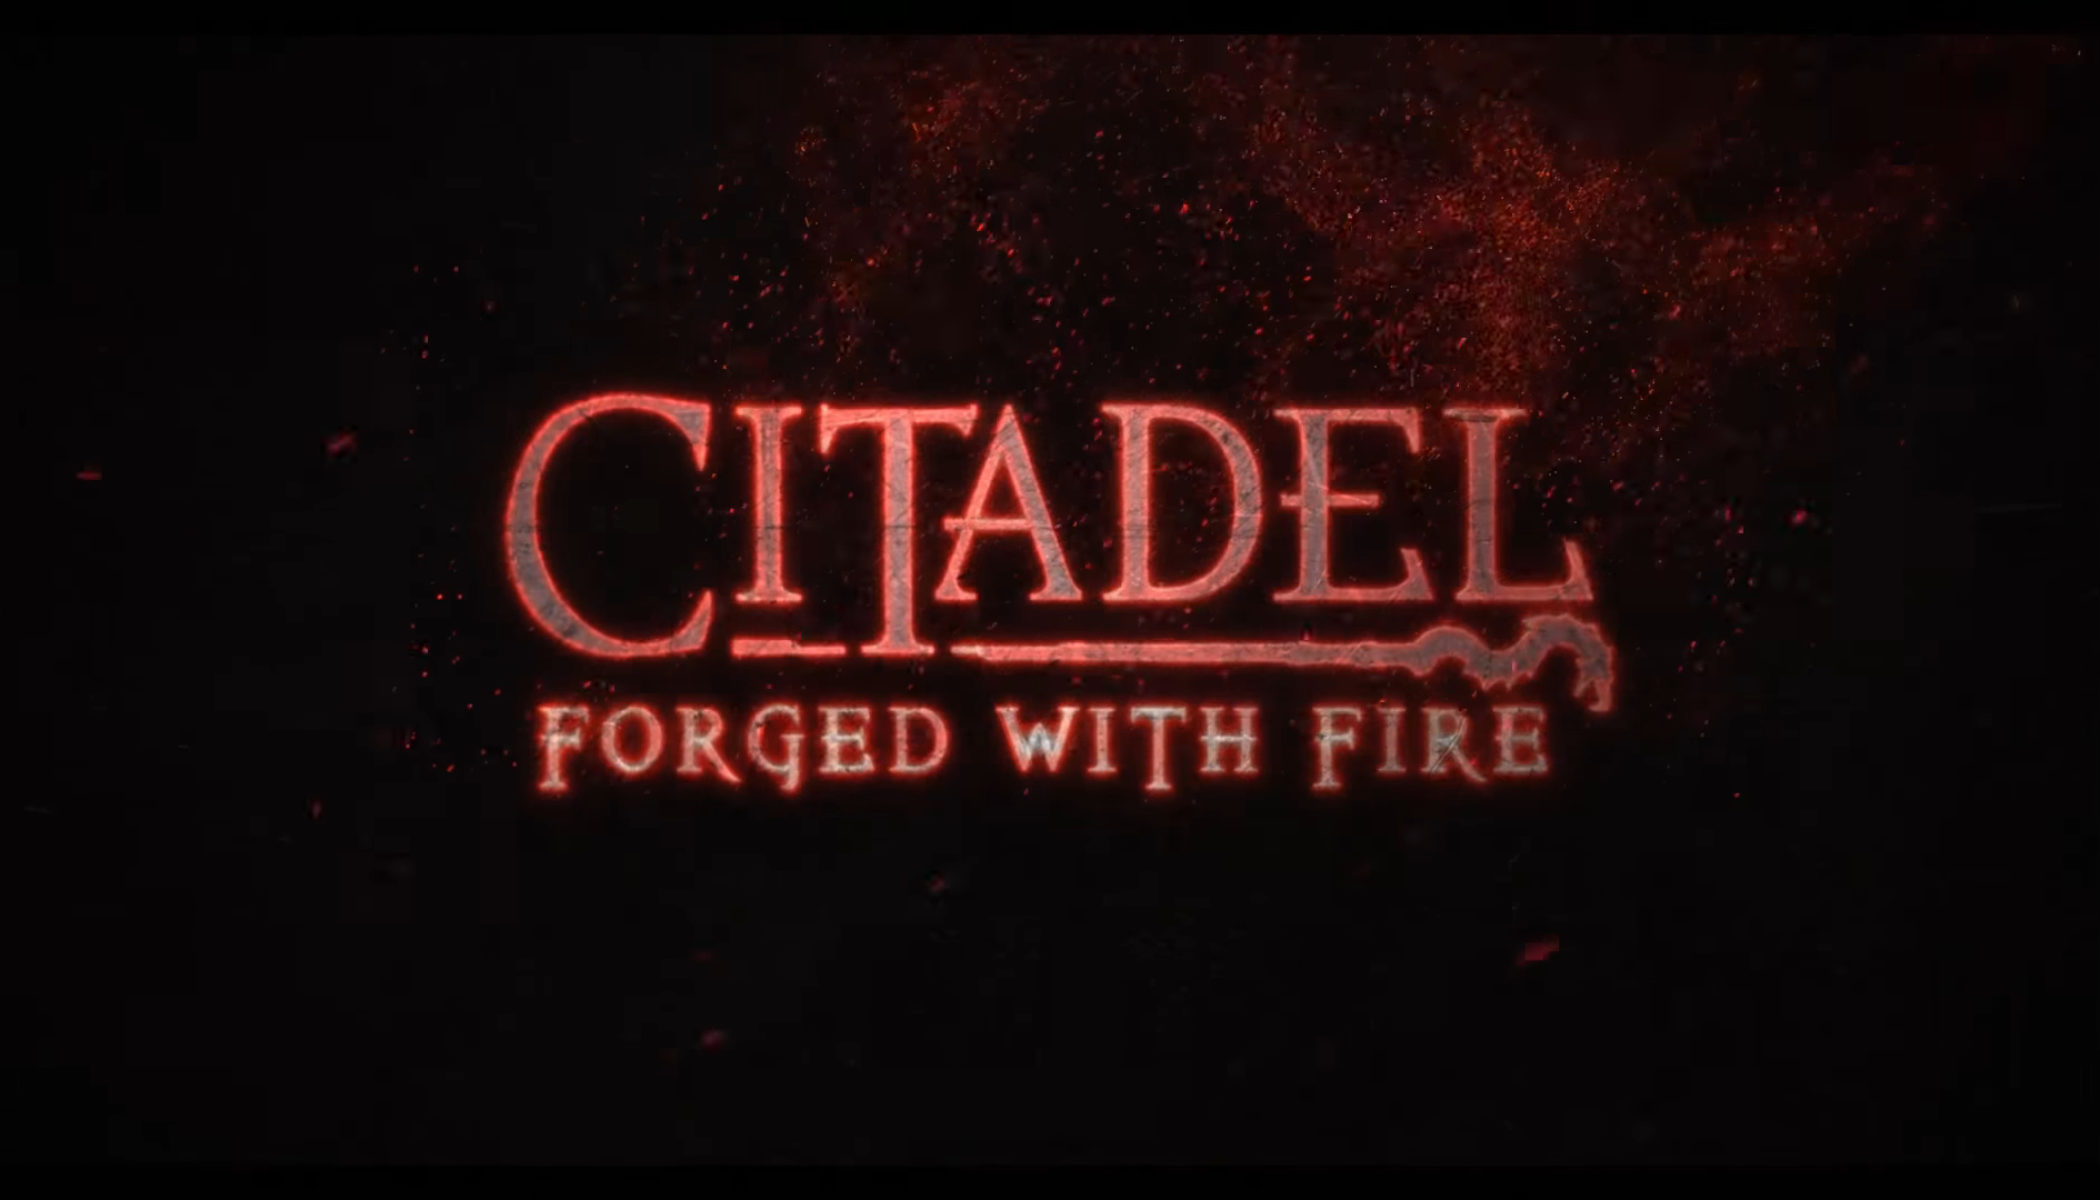 Fantasy Sandbox RPG Citadel: Forged with Fire Out Now on PC